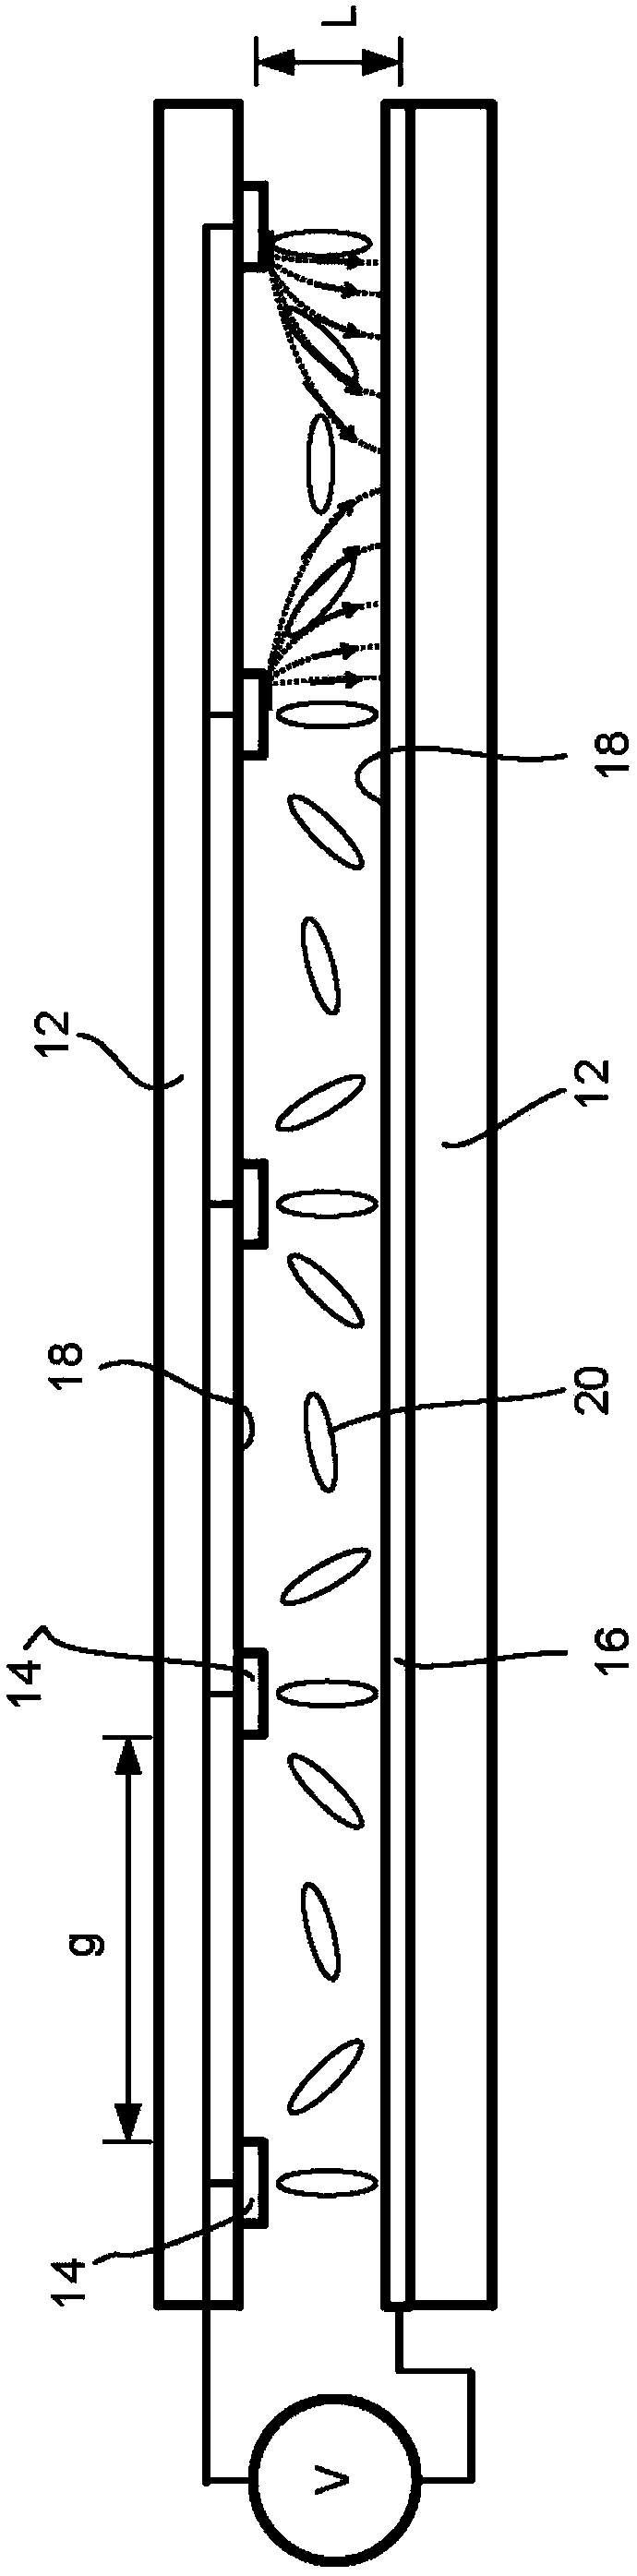 Liquid crystal beam control device and manufacture